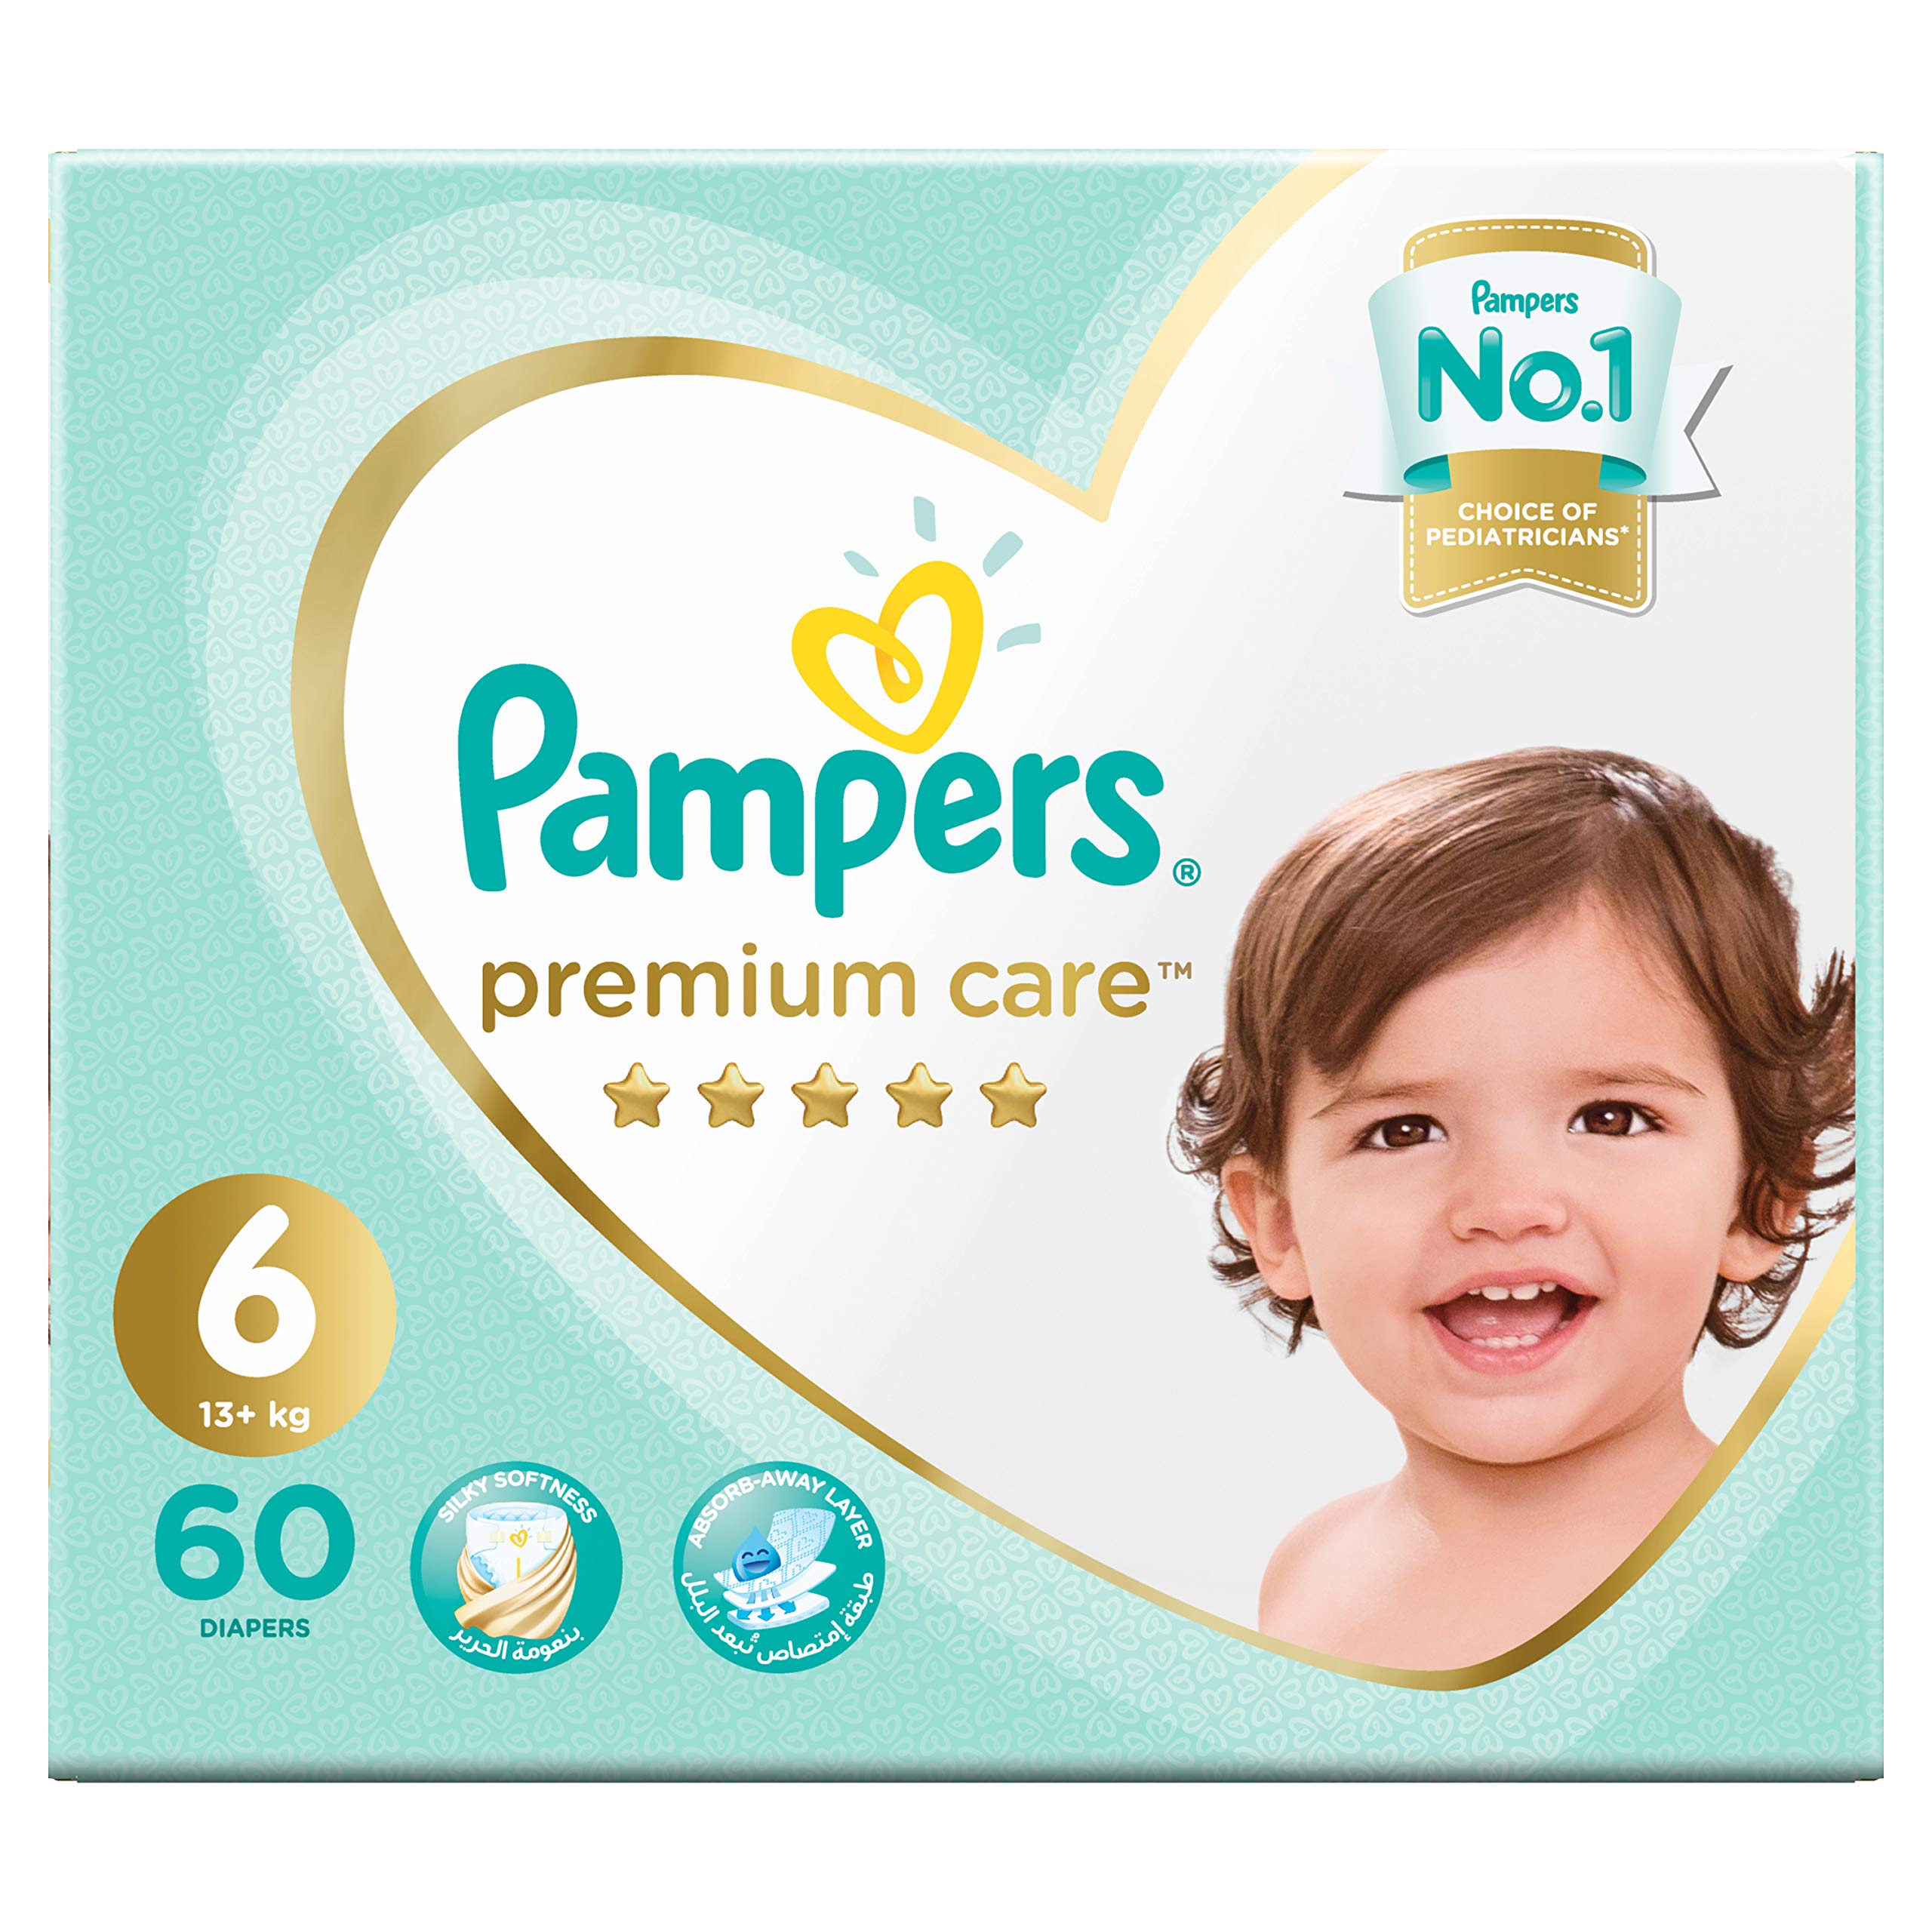 Pampers Premium Care Diapers, Size 6, 13+ kg, The Softest Diaper and the Best Skin Protection, 120 Baby Diapers حفاضات بامبرز عناية مميّزة، مقاس 6، كبير جداً،13+ كلغ، صندوق ضخم مزدوج،120 حفاضاً